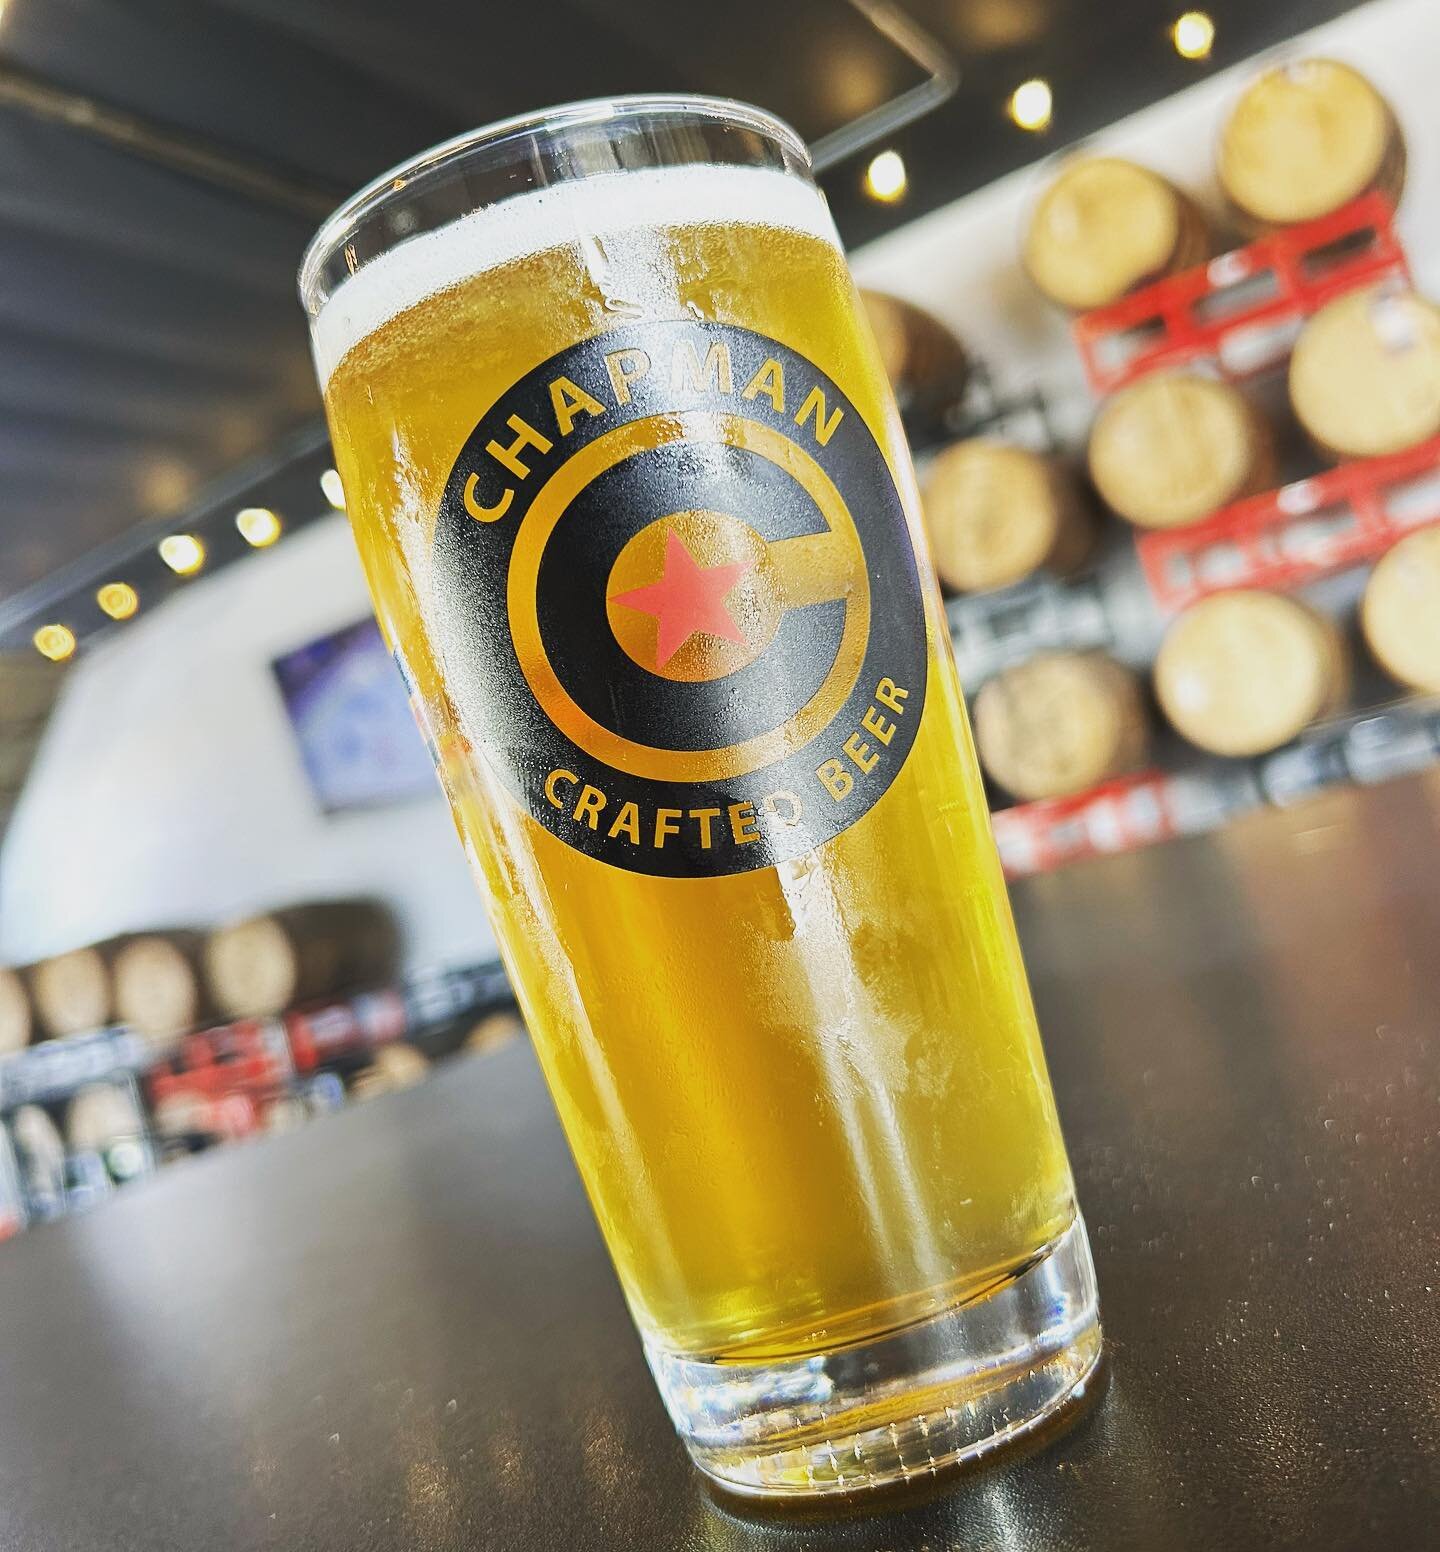 Grabbing a told cold one to beat the heat at @chapmancrafted 🍻🍻 #tuesday #orangecounty